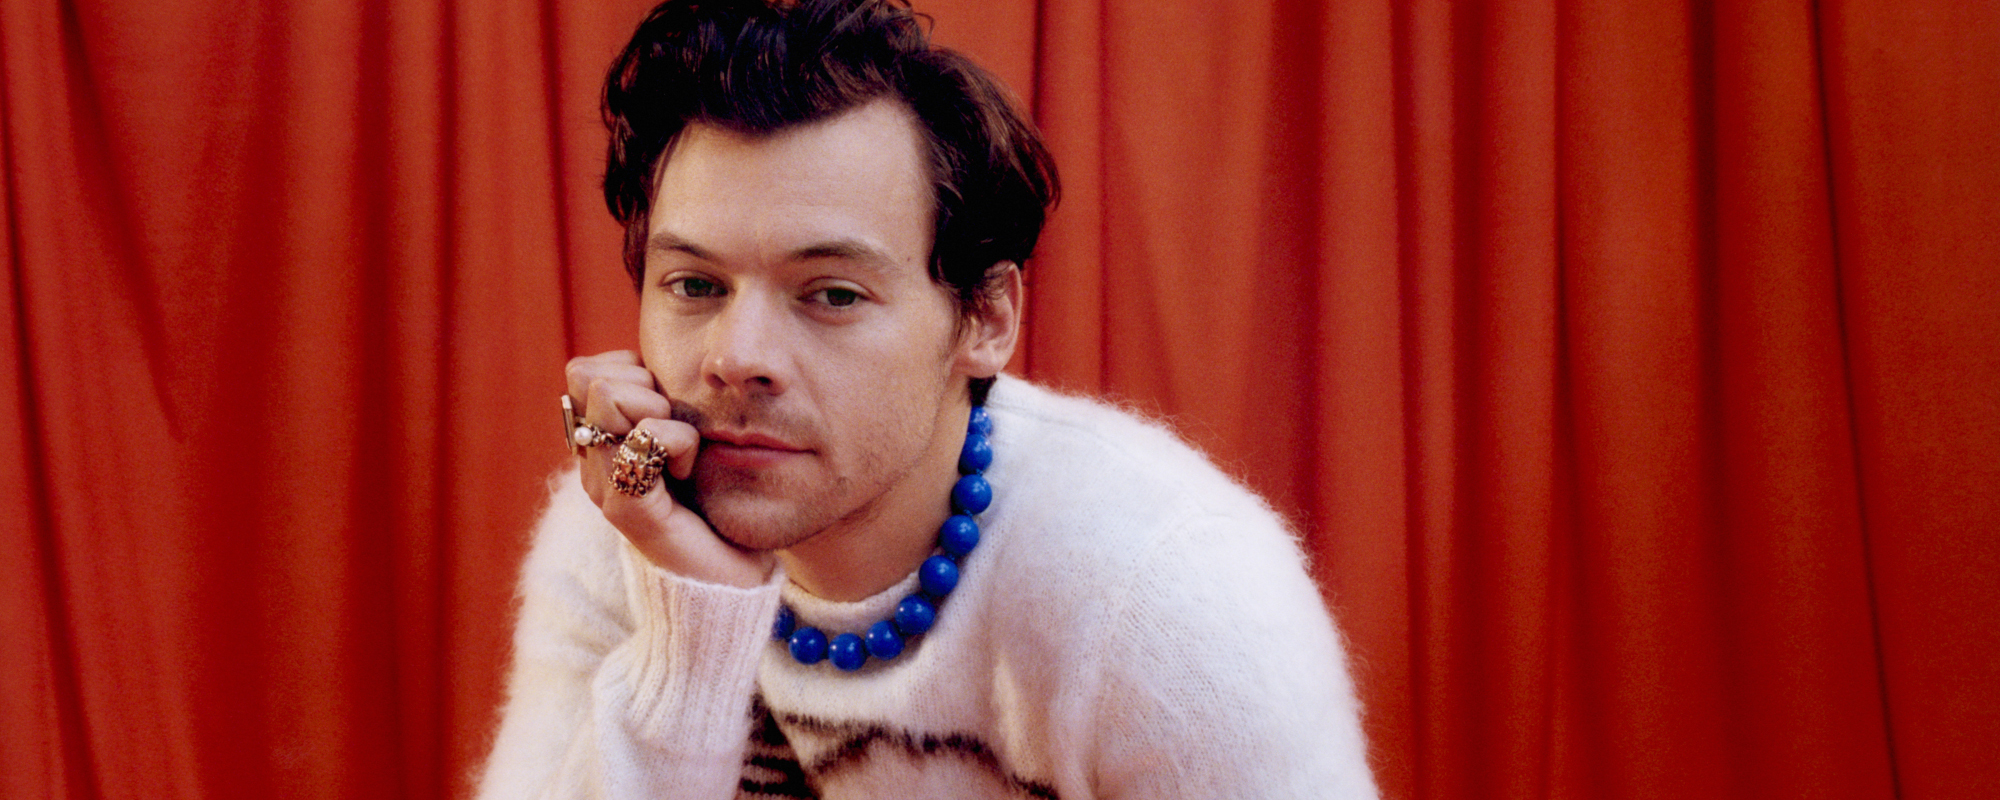 Harry Styles Speaks Out: “End Gun Violence”